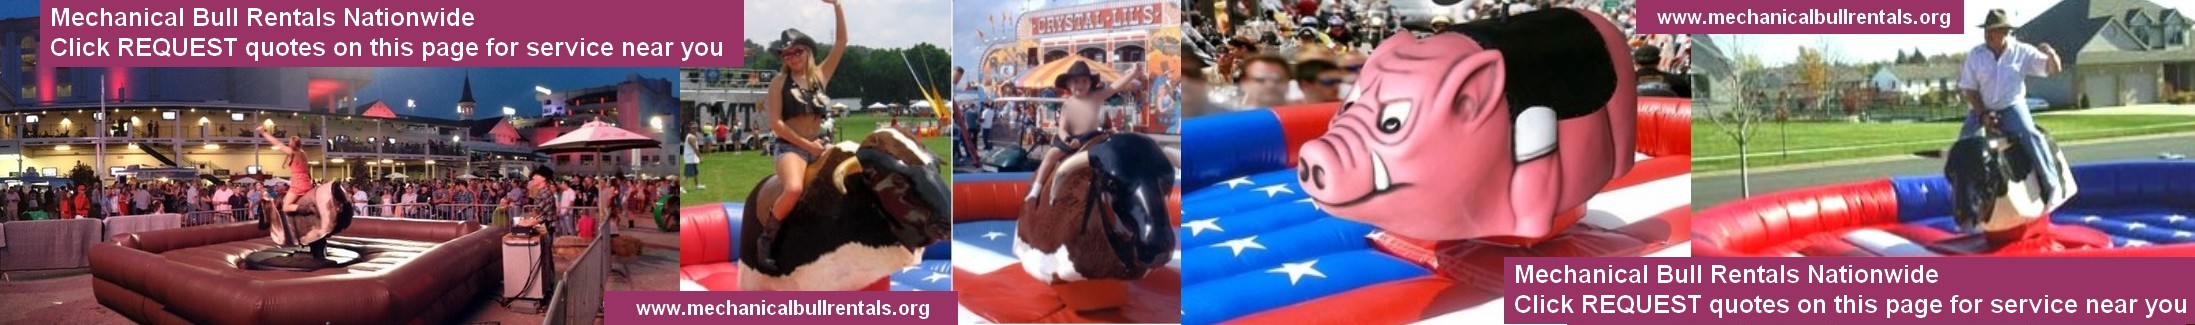 Mechanical Bull Rentals Lancaster Ohio OH and near you. Free referrals to local mechanical bull companies LOGO